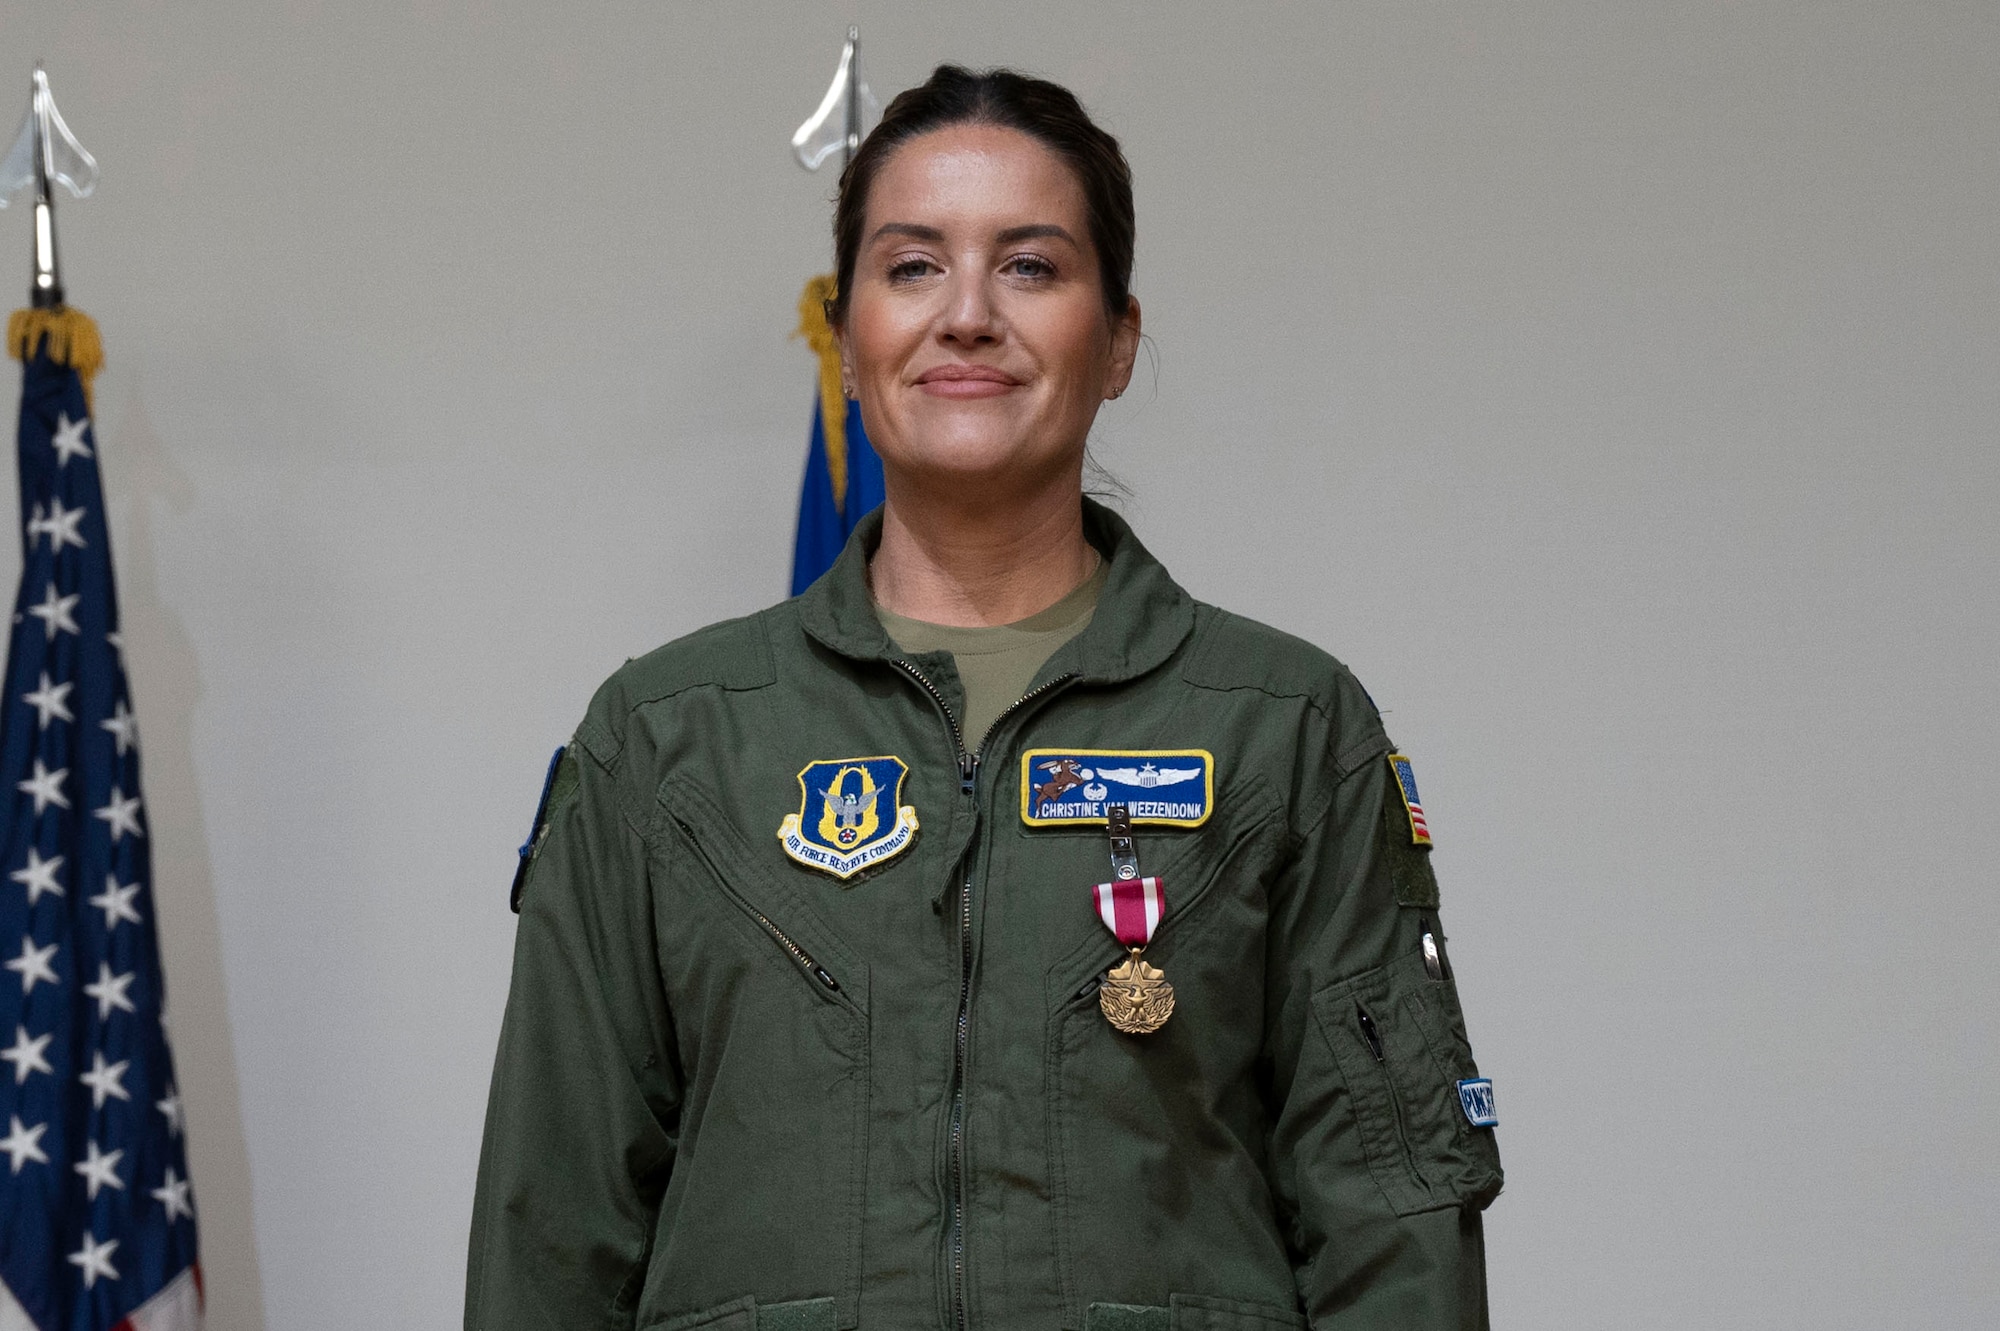 U.S. Air Force Lt. Col. Christine Van Weezendonk, former 96th Flying Training Squadron commander stands at attention after receiving the Meritorious Service Medal at the 96th FTS change of command ceremony at Laughlin Air Force Base, Texas, May 10, 2024. As commander, Weezendonk lead the recruitment, training and development of a 75-person Associate Reserve Instructor Pilot Corps and support personnel. (U.S. Air Force photo by Senior Airman Kailee Reynolds)